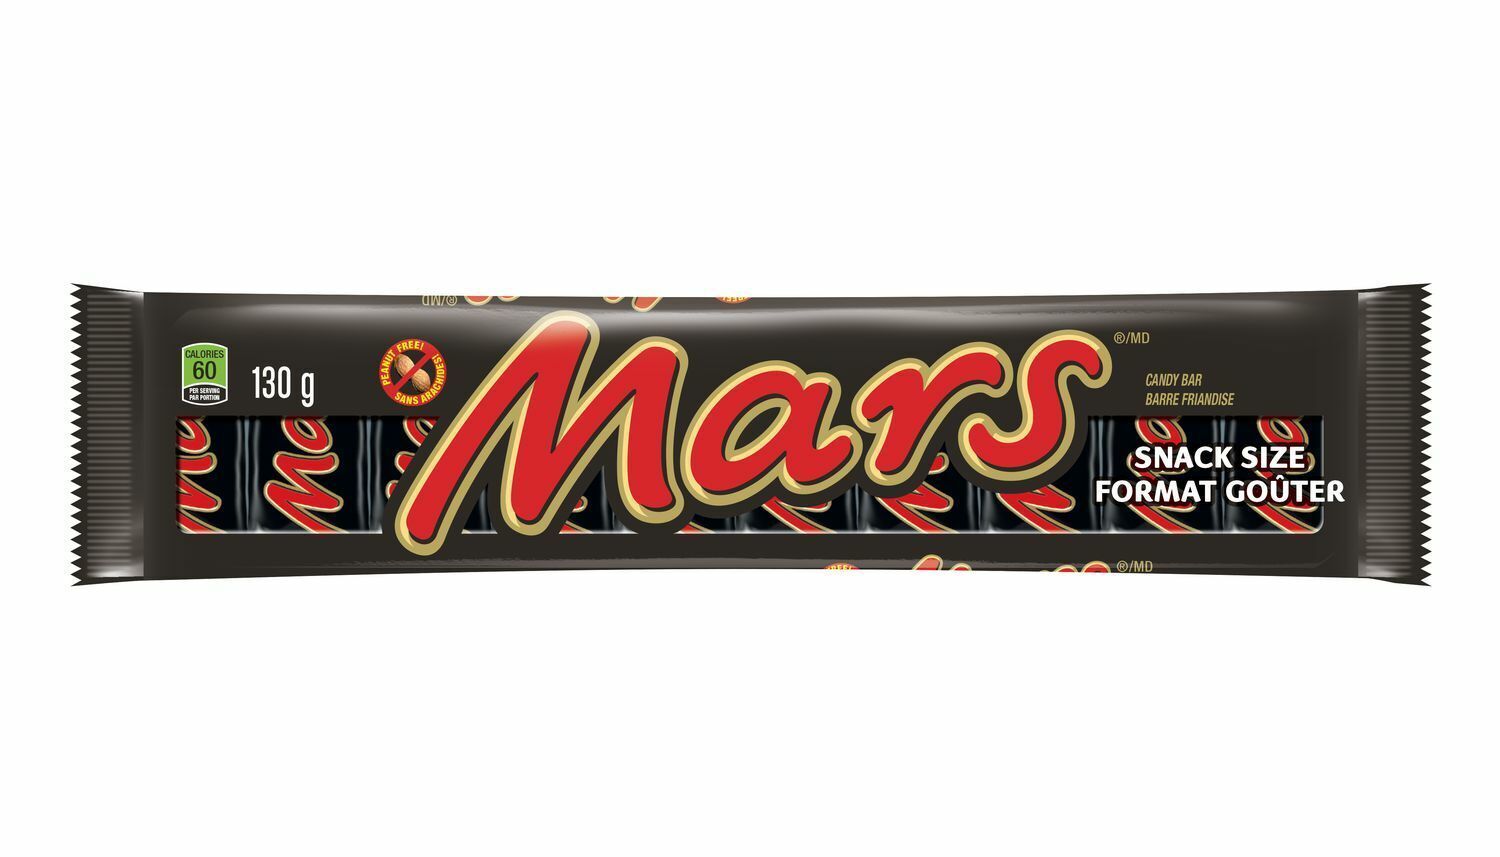 10 packs MARS Caramel Chocolate Candy Mini Bars Snack Size Canadian 130g each - $42.57